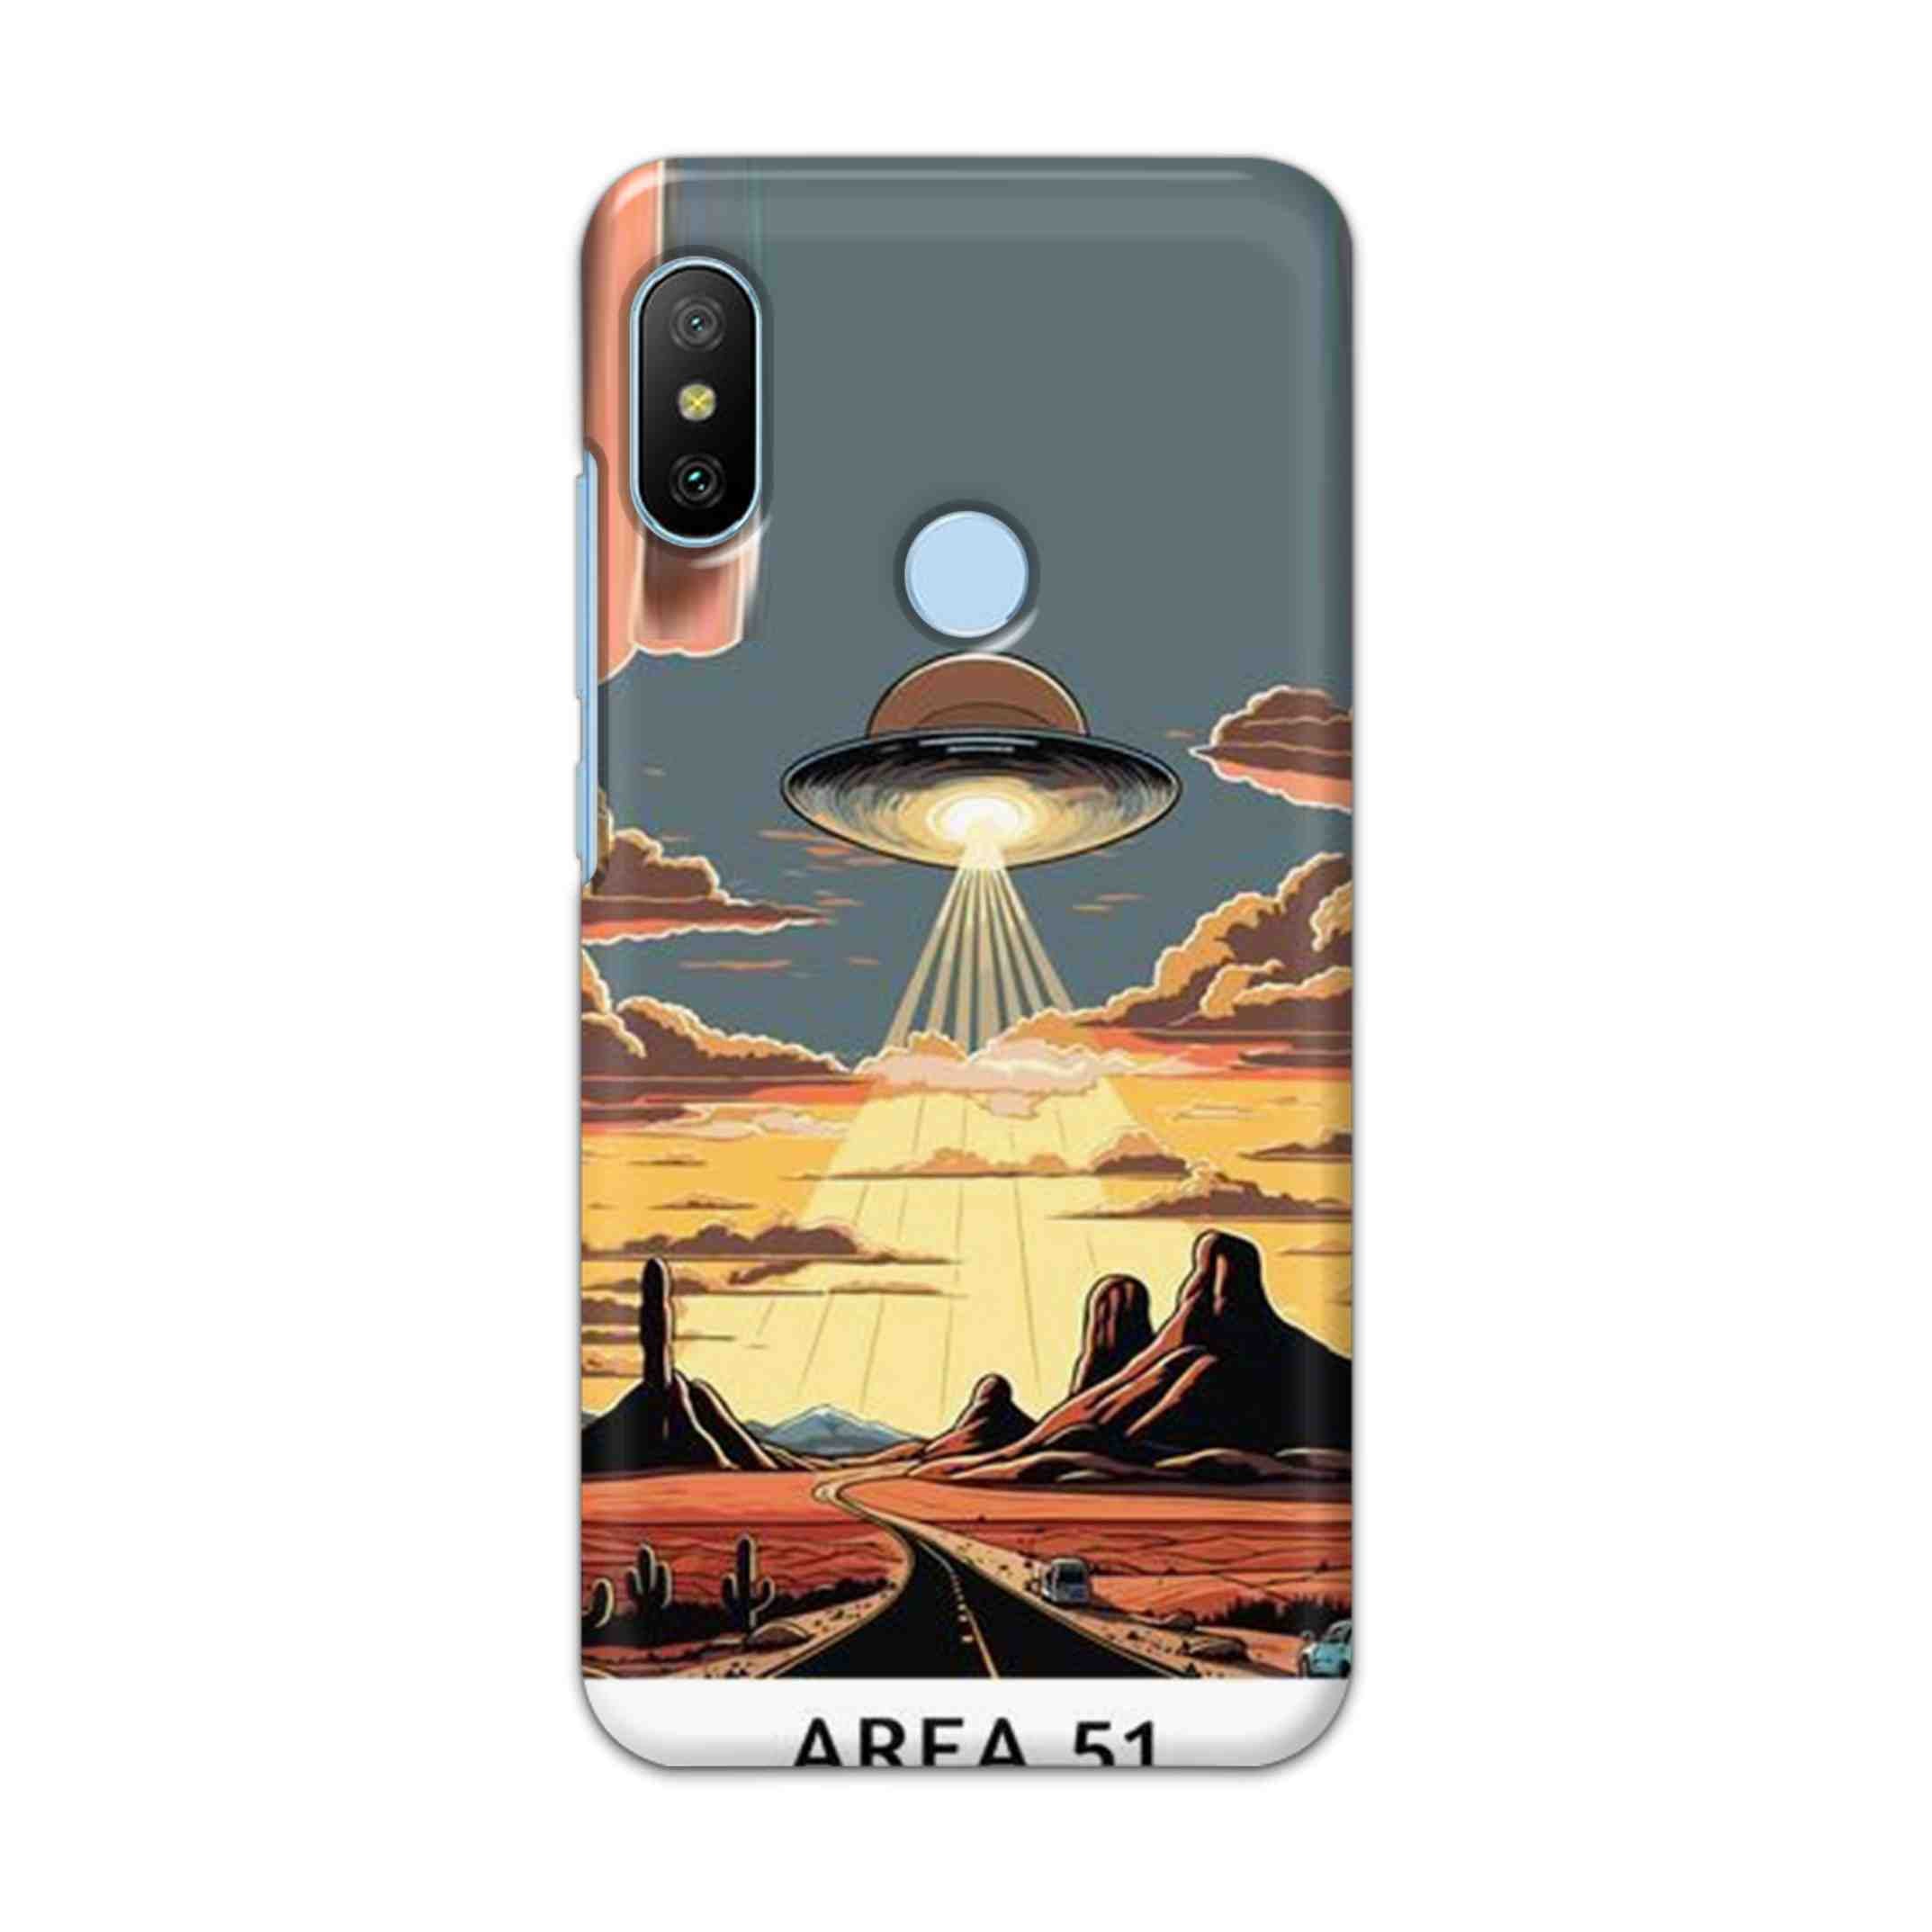 Buy Area 51 Hard Back Mobile Phone Case/Cover For Xiaomi A2 / 6X Online